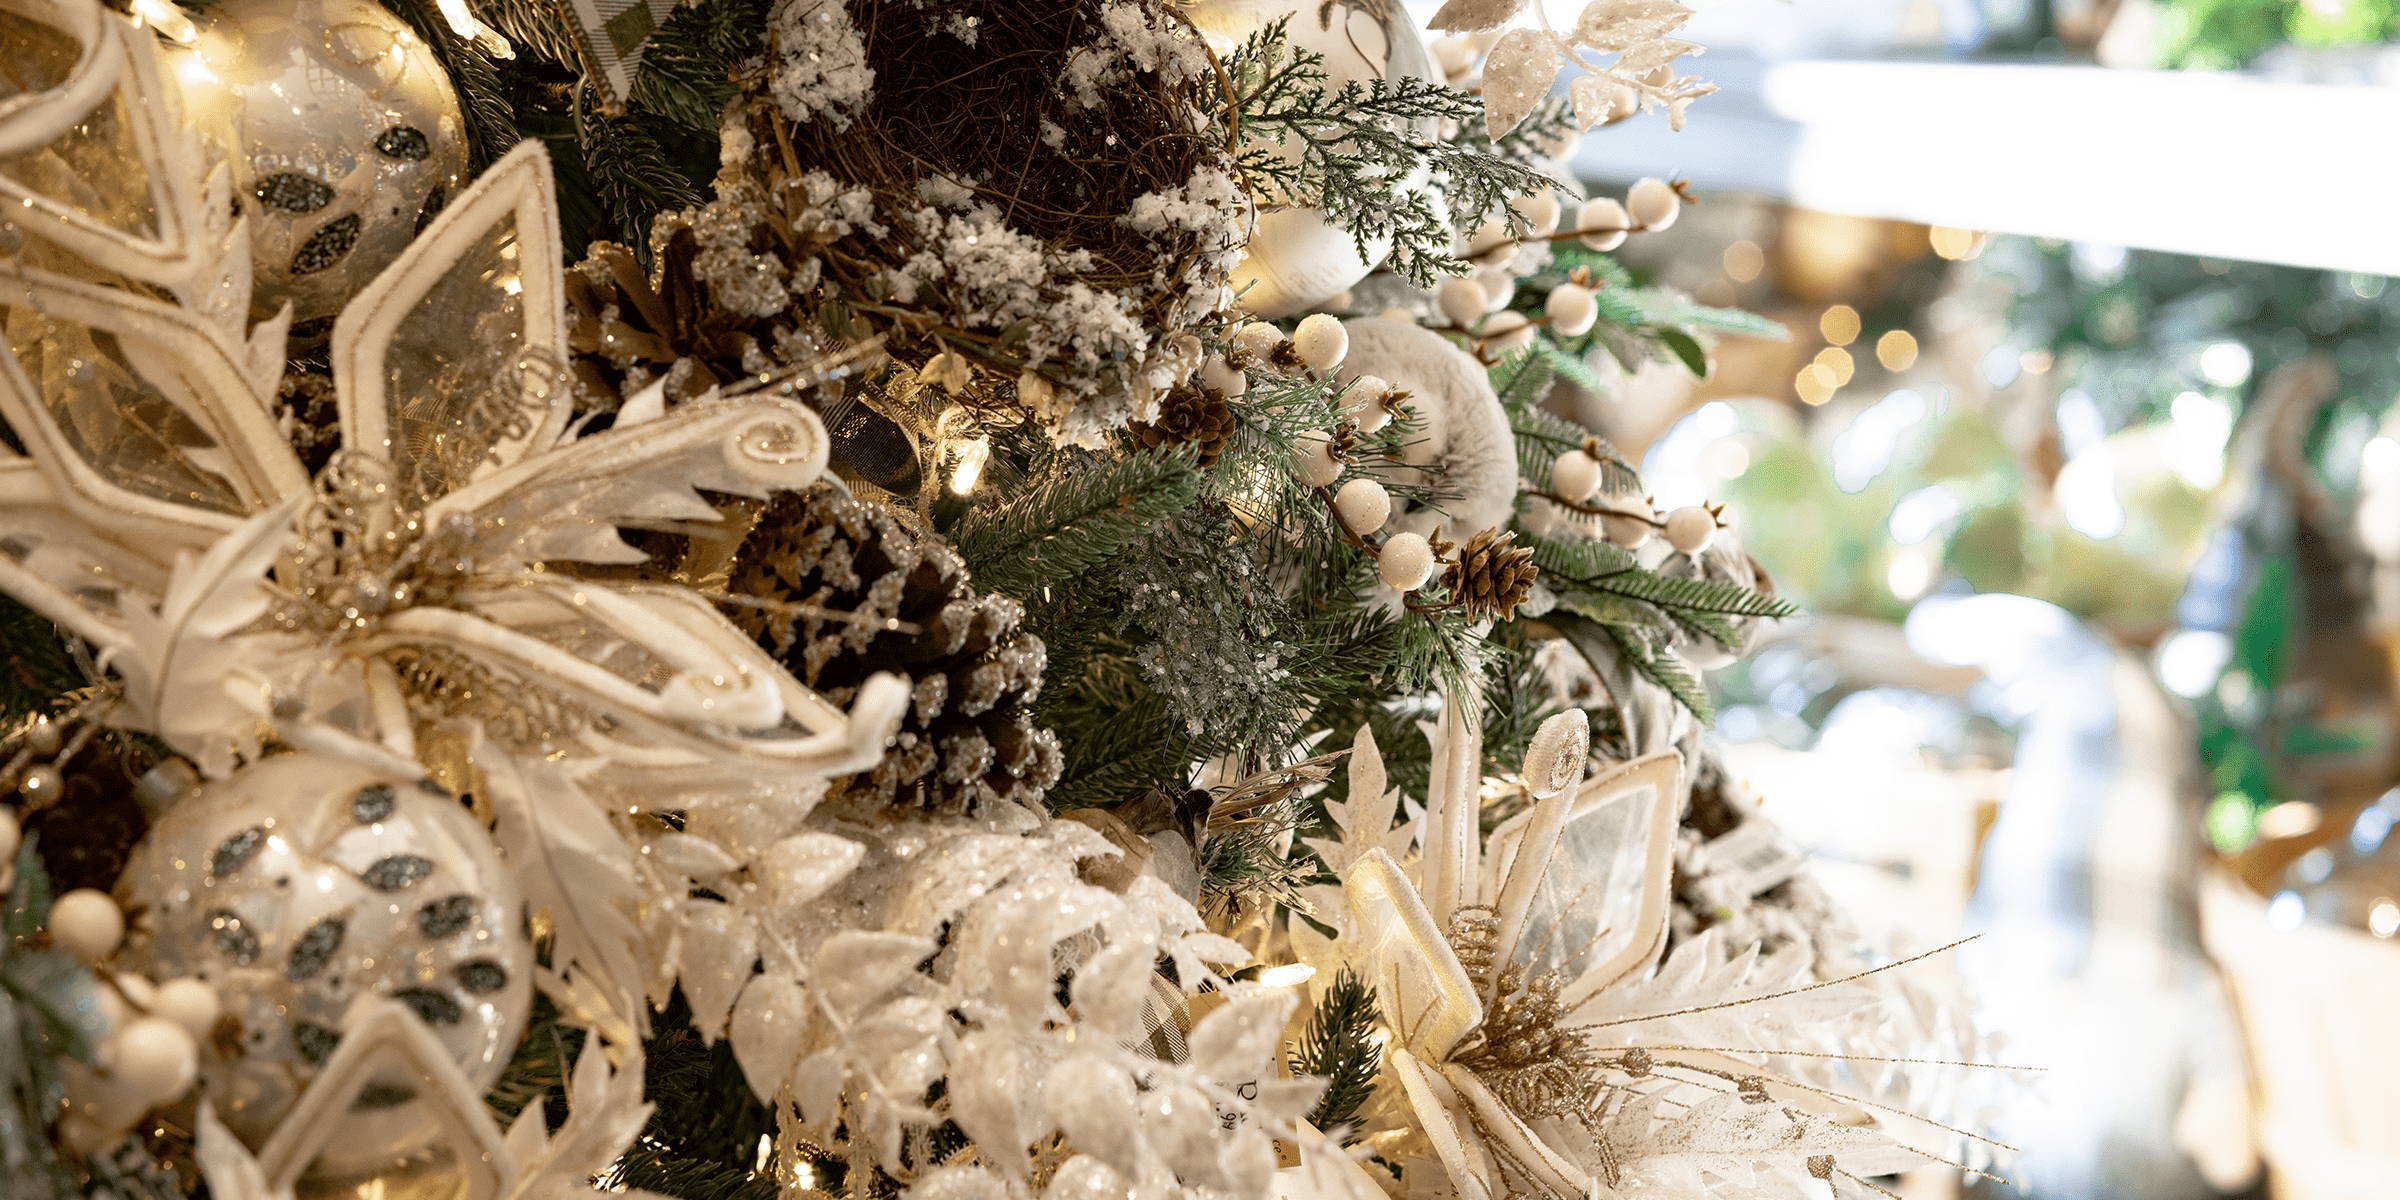 Christmas decor with natural elements including pinecones, berries, and owls